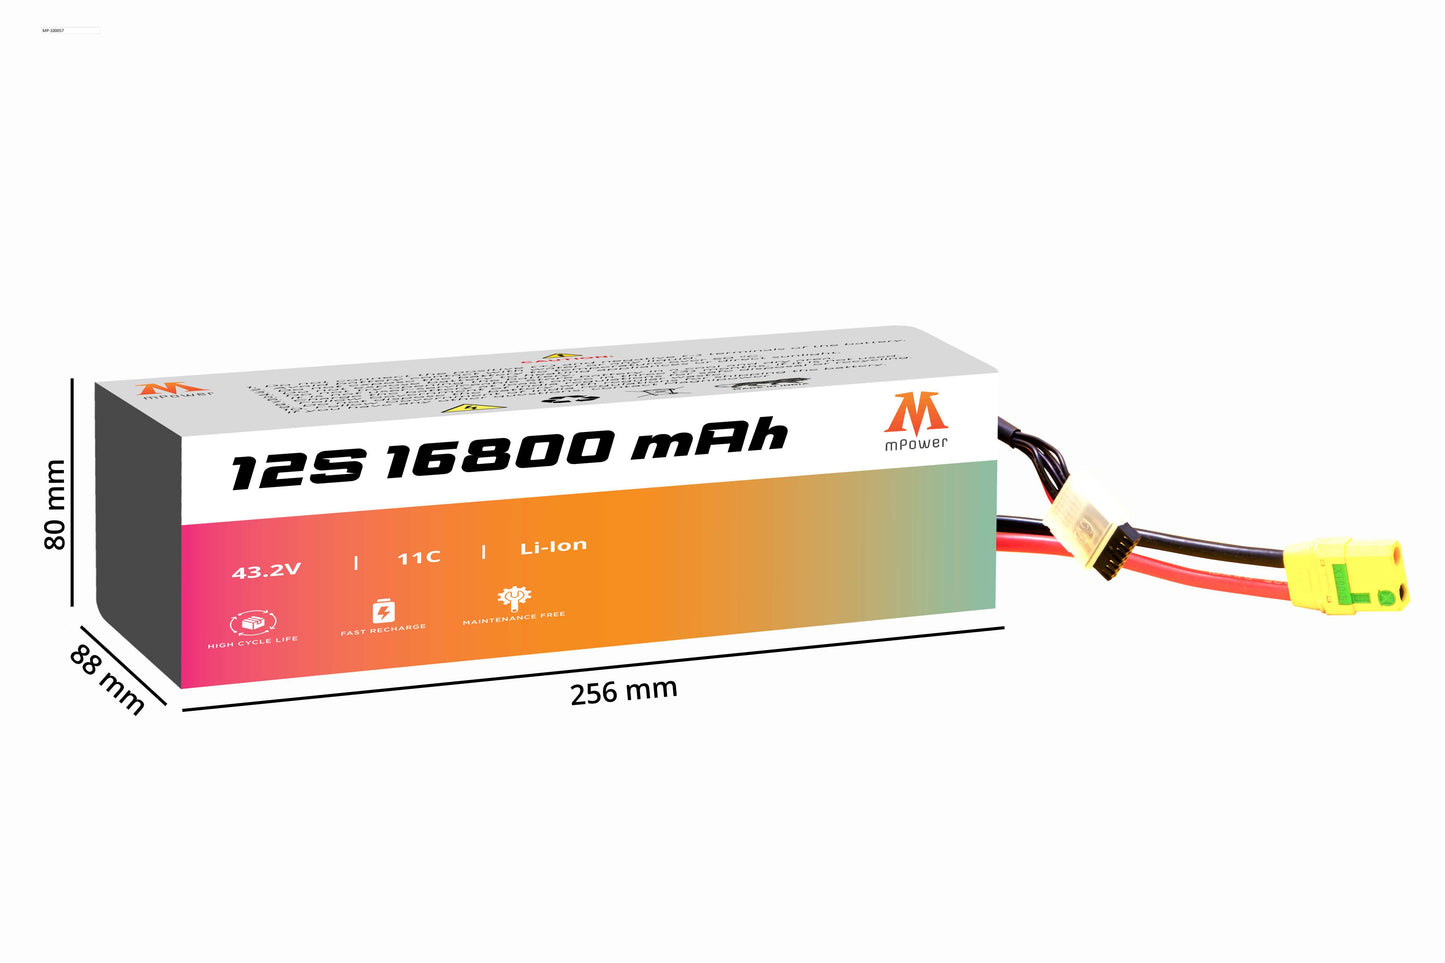 mPower 12S 16800mAh Lithium-Ion Battery for Survey Drones